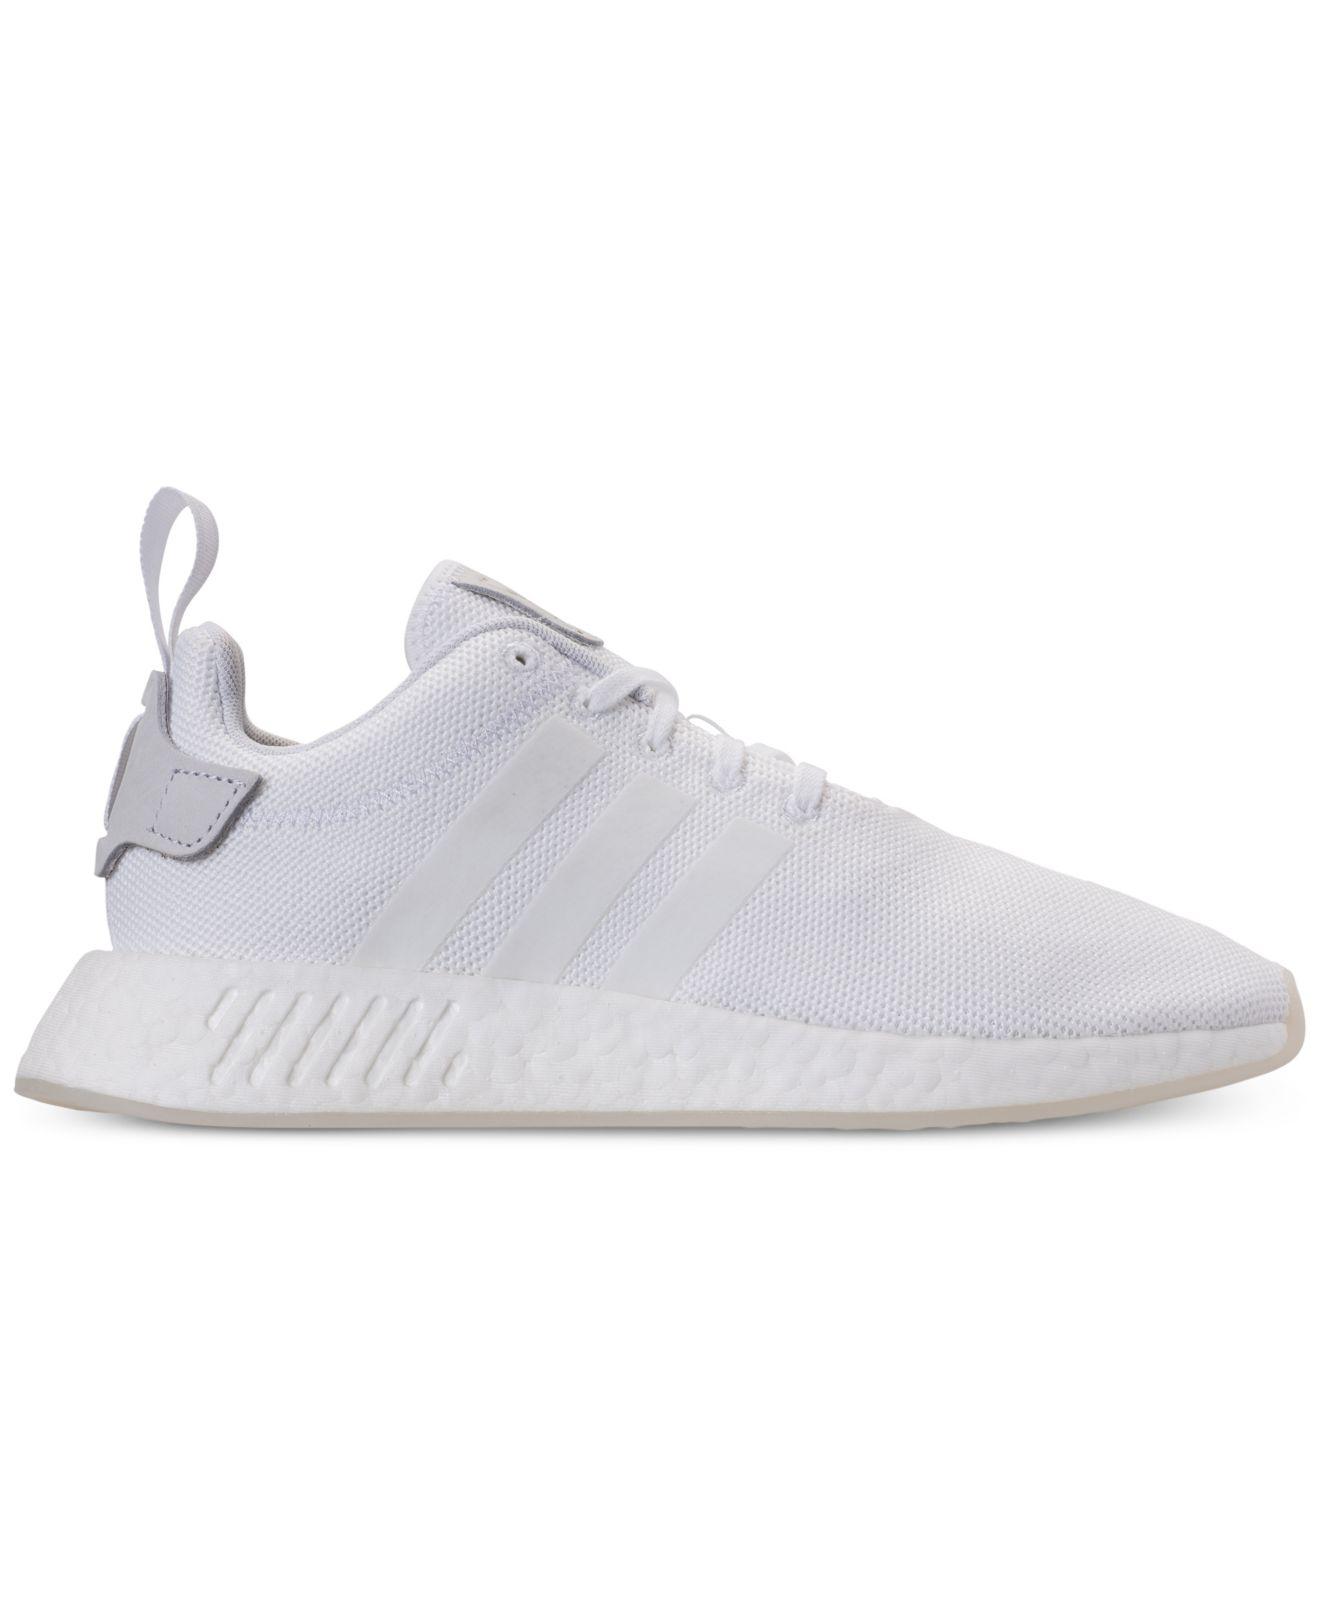 nmd r2 casual sneakers